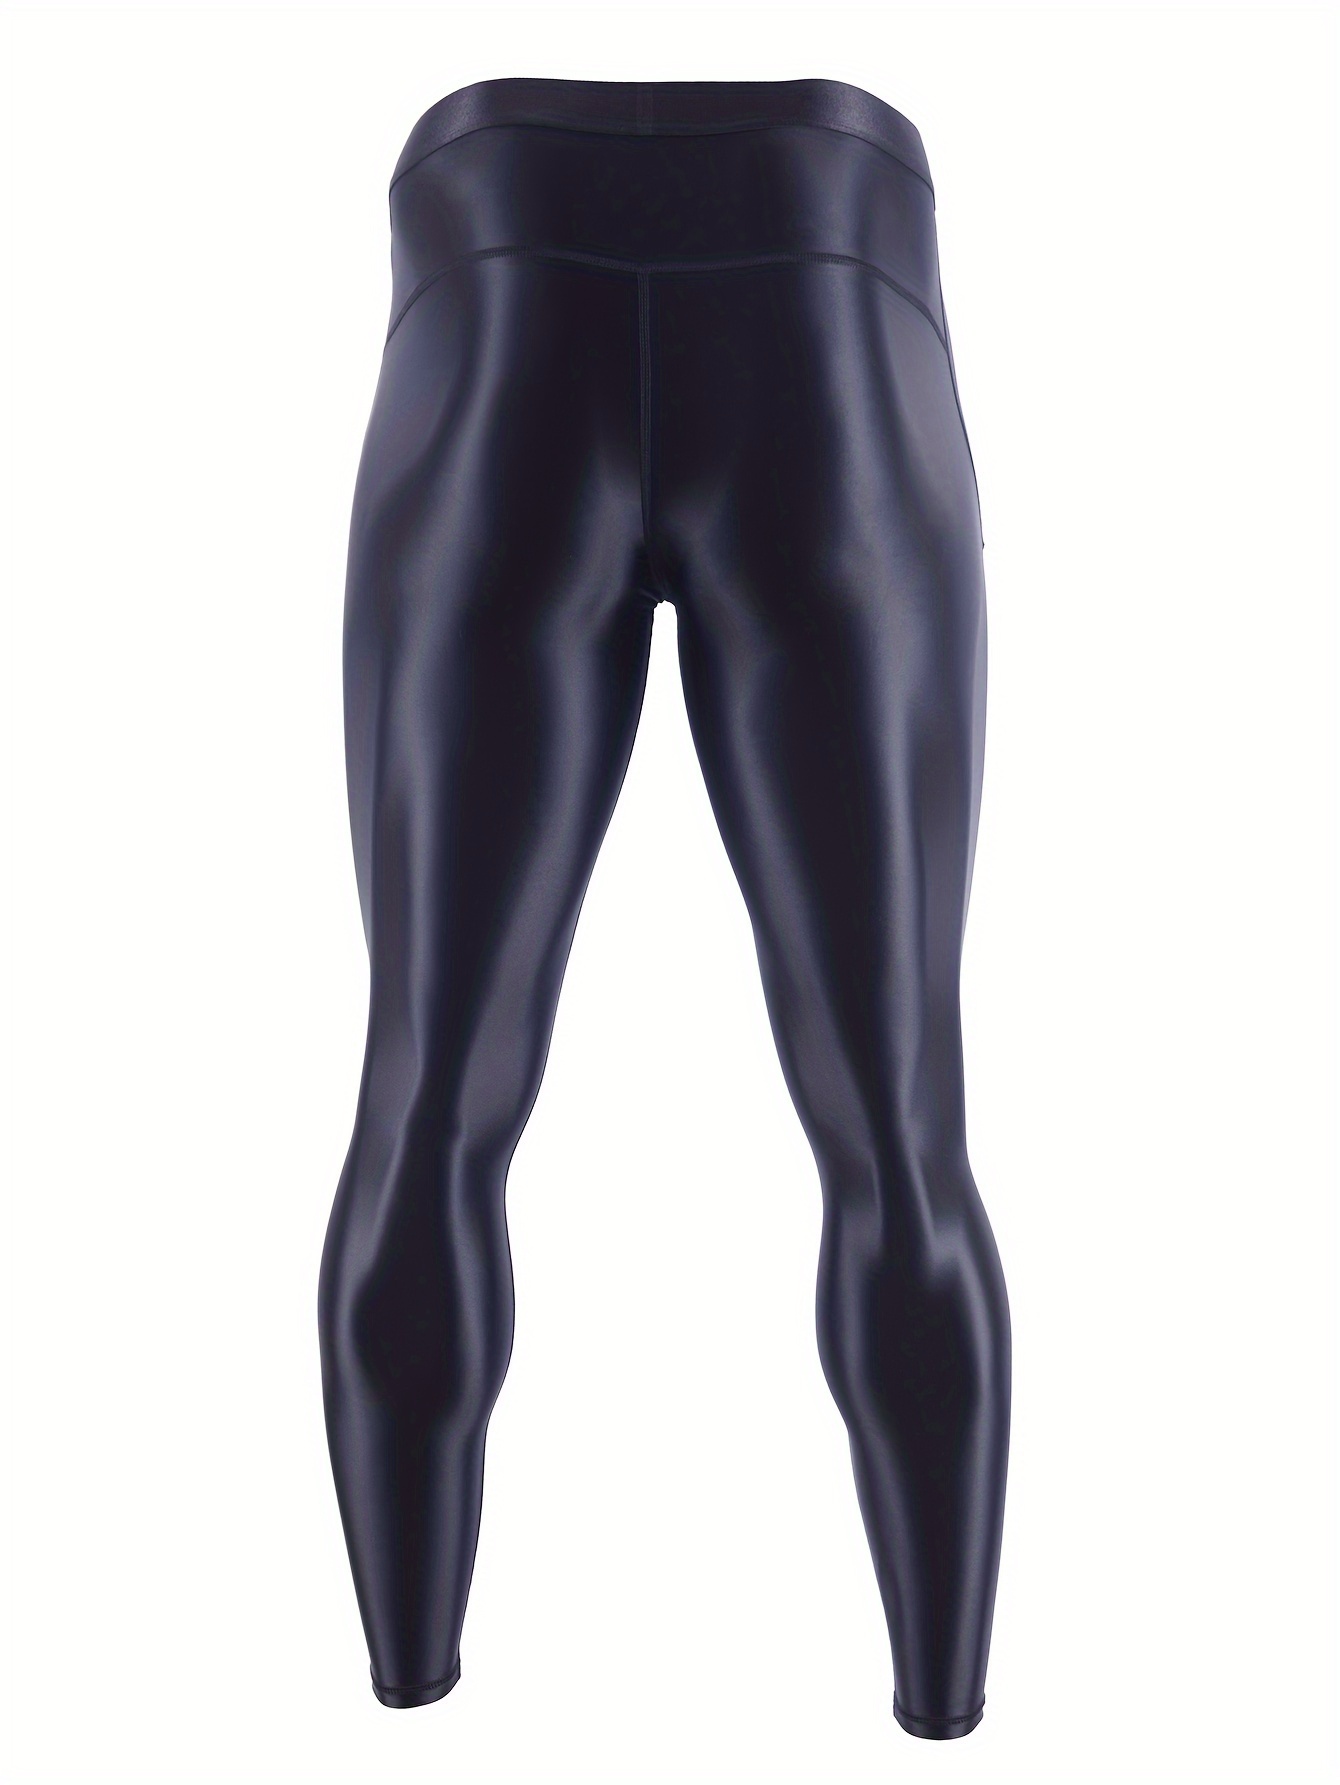 Men's Oil Glossy Mesh Yoga Pants See Through Tights Fitness